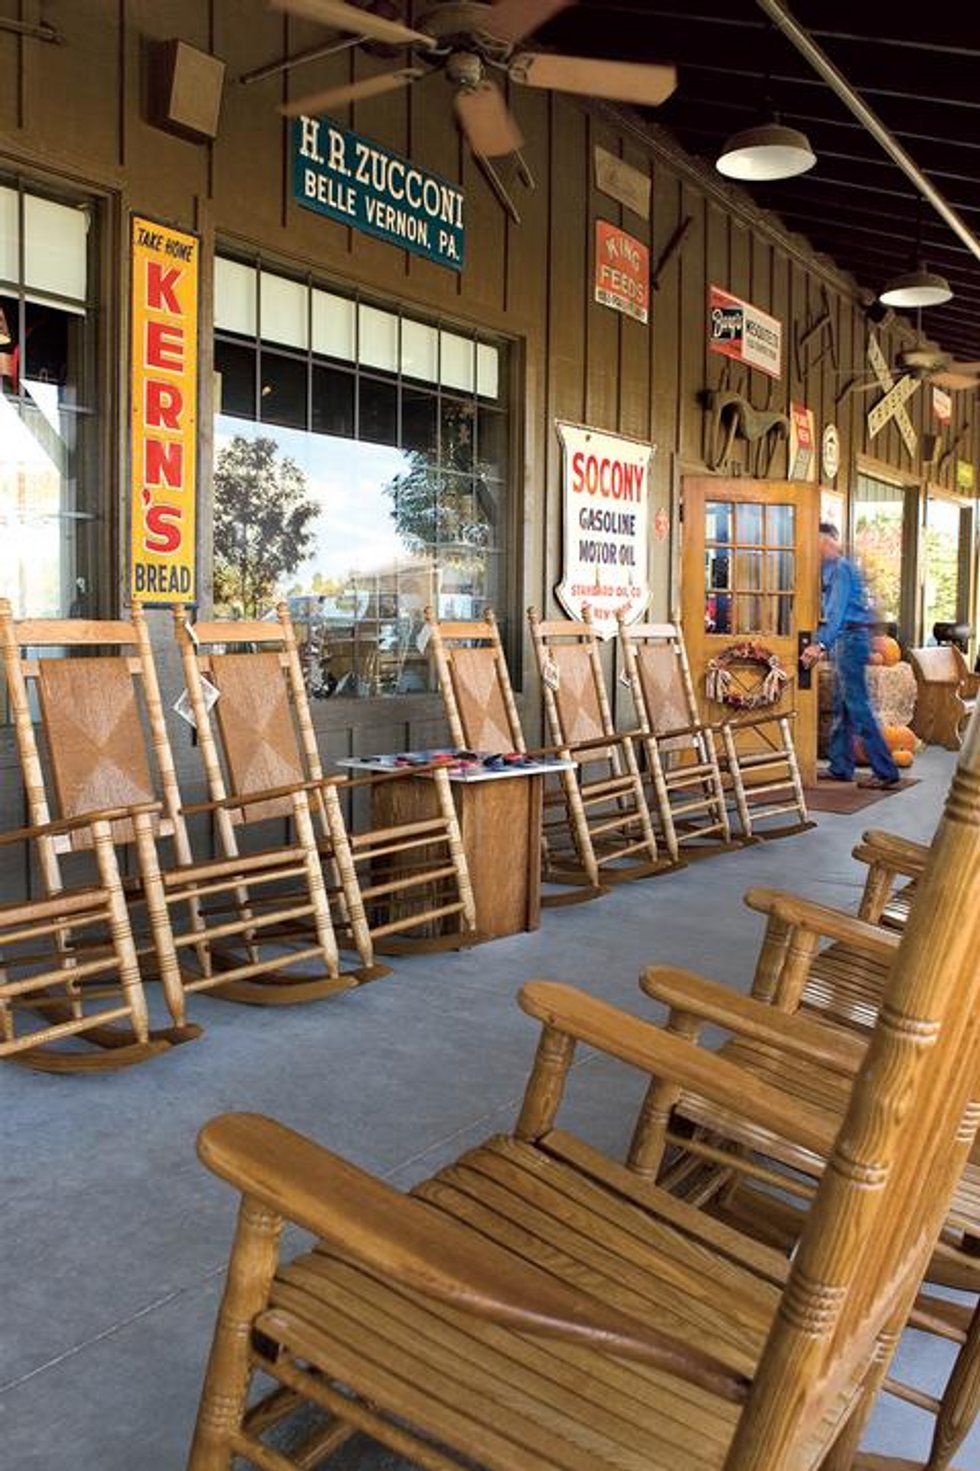 Several brown, wood rocking chairs lined up on the front porch of a Cracker Barrel restaurant.